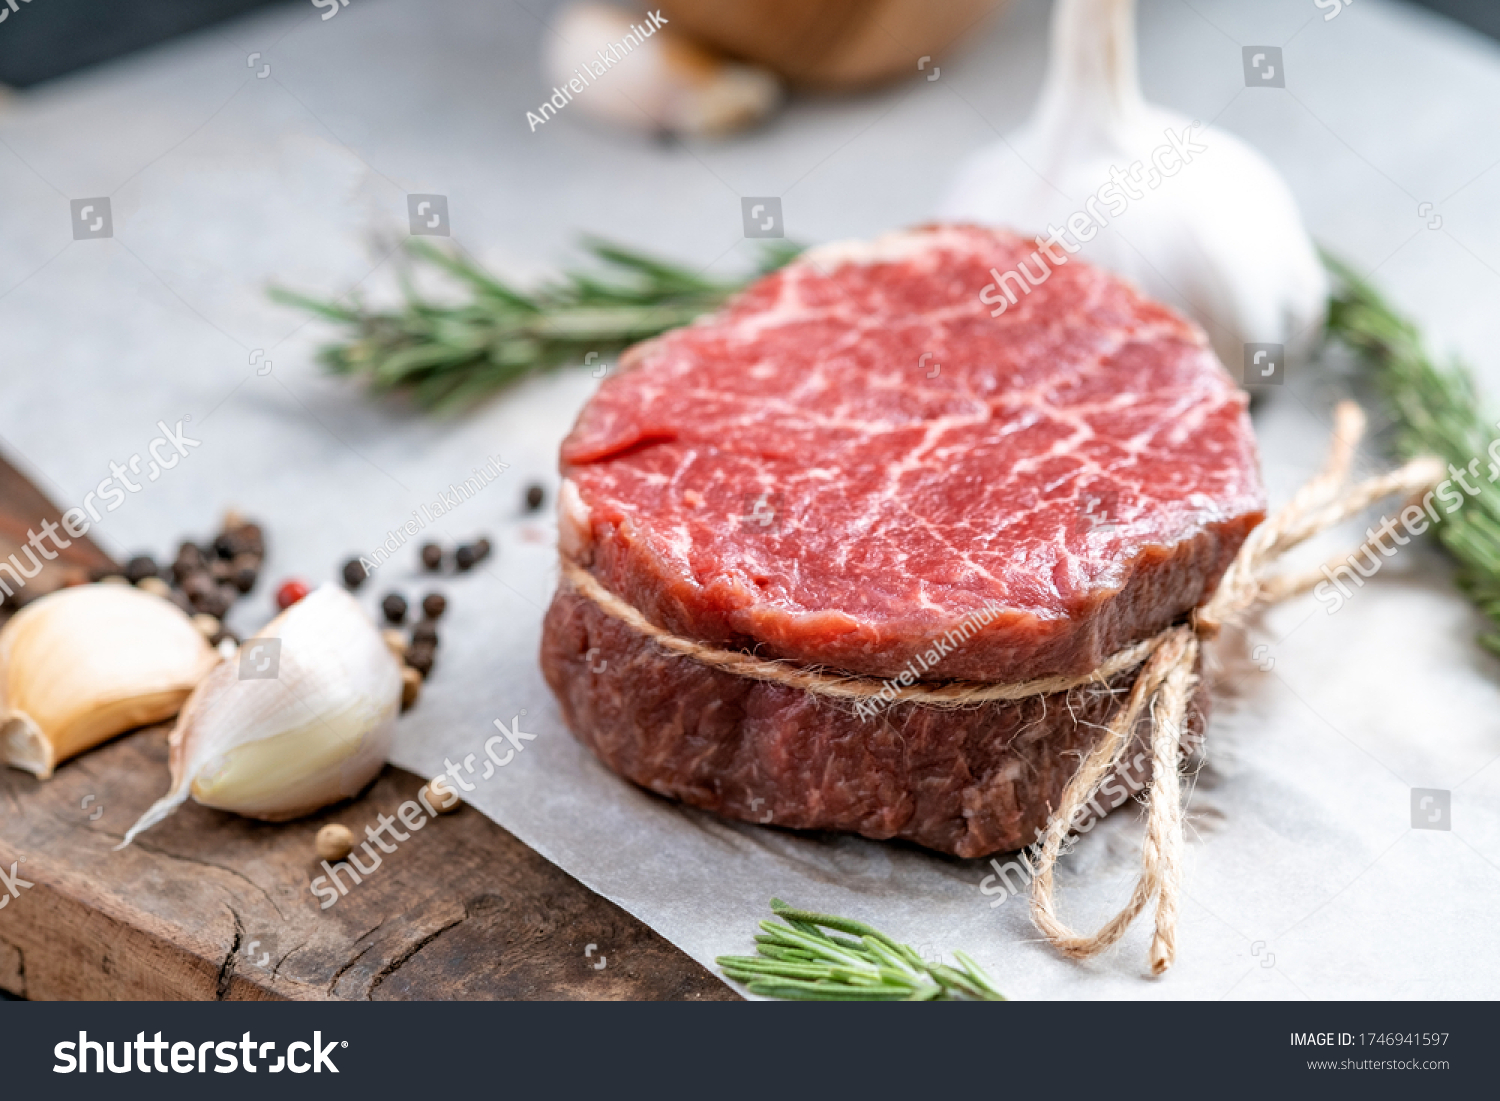 Raw beef filet Mignon steak on a wooden Board on paper with ingredients for grilling, close up #1746941597